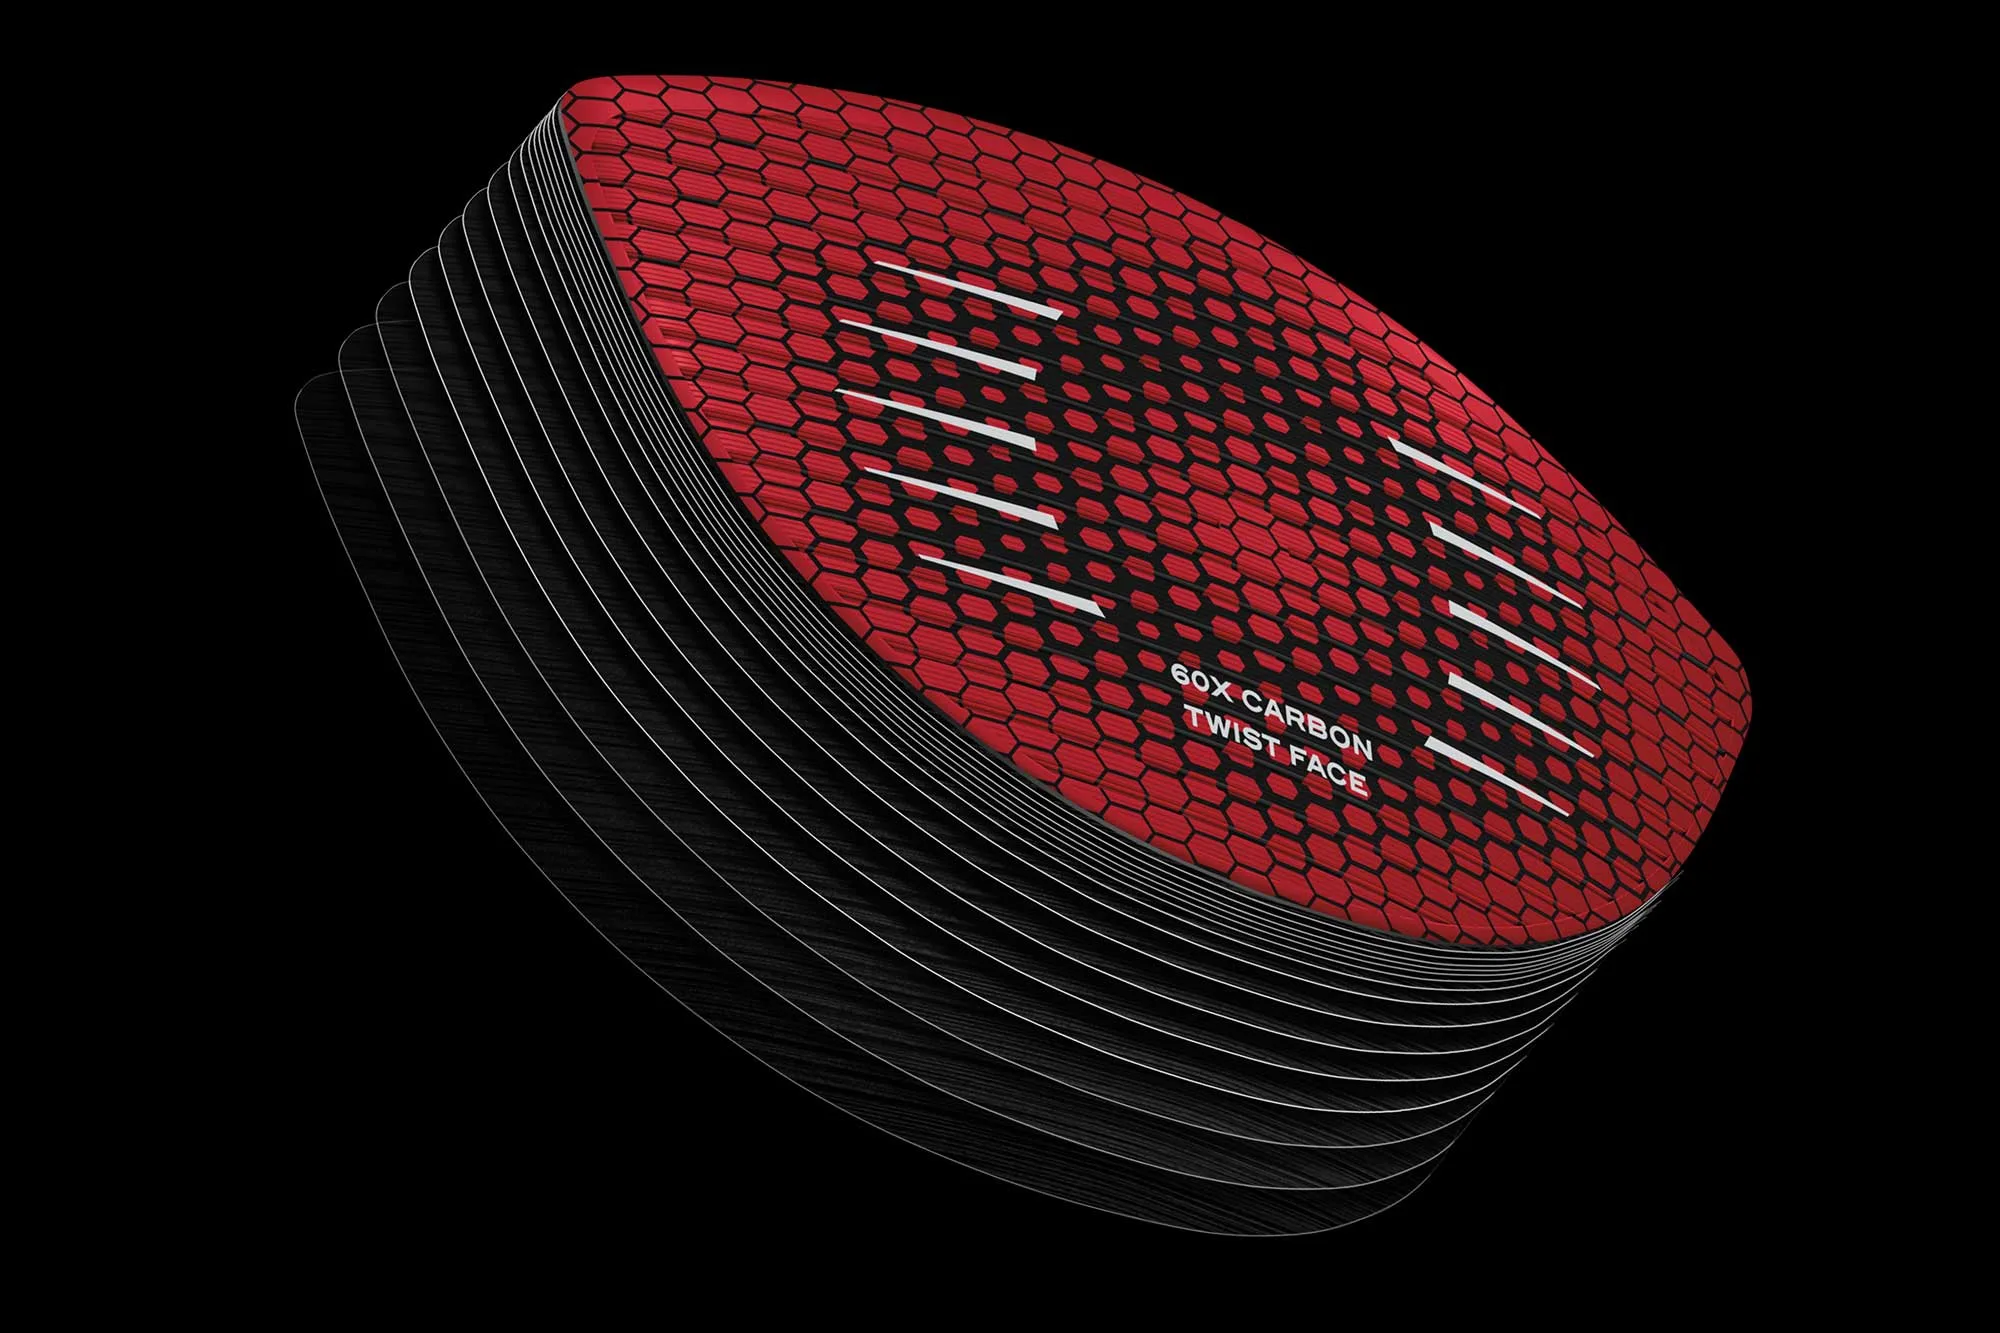 It's TaylorMade's new era-defining technology – but what is carbonwood?